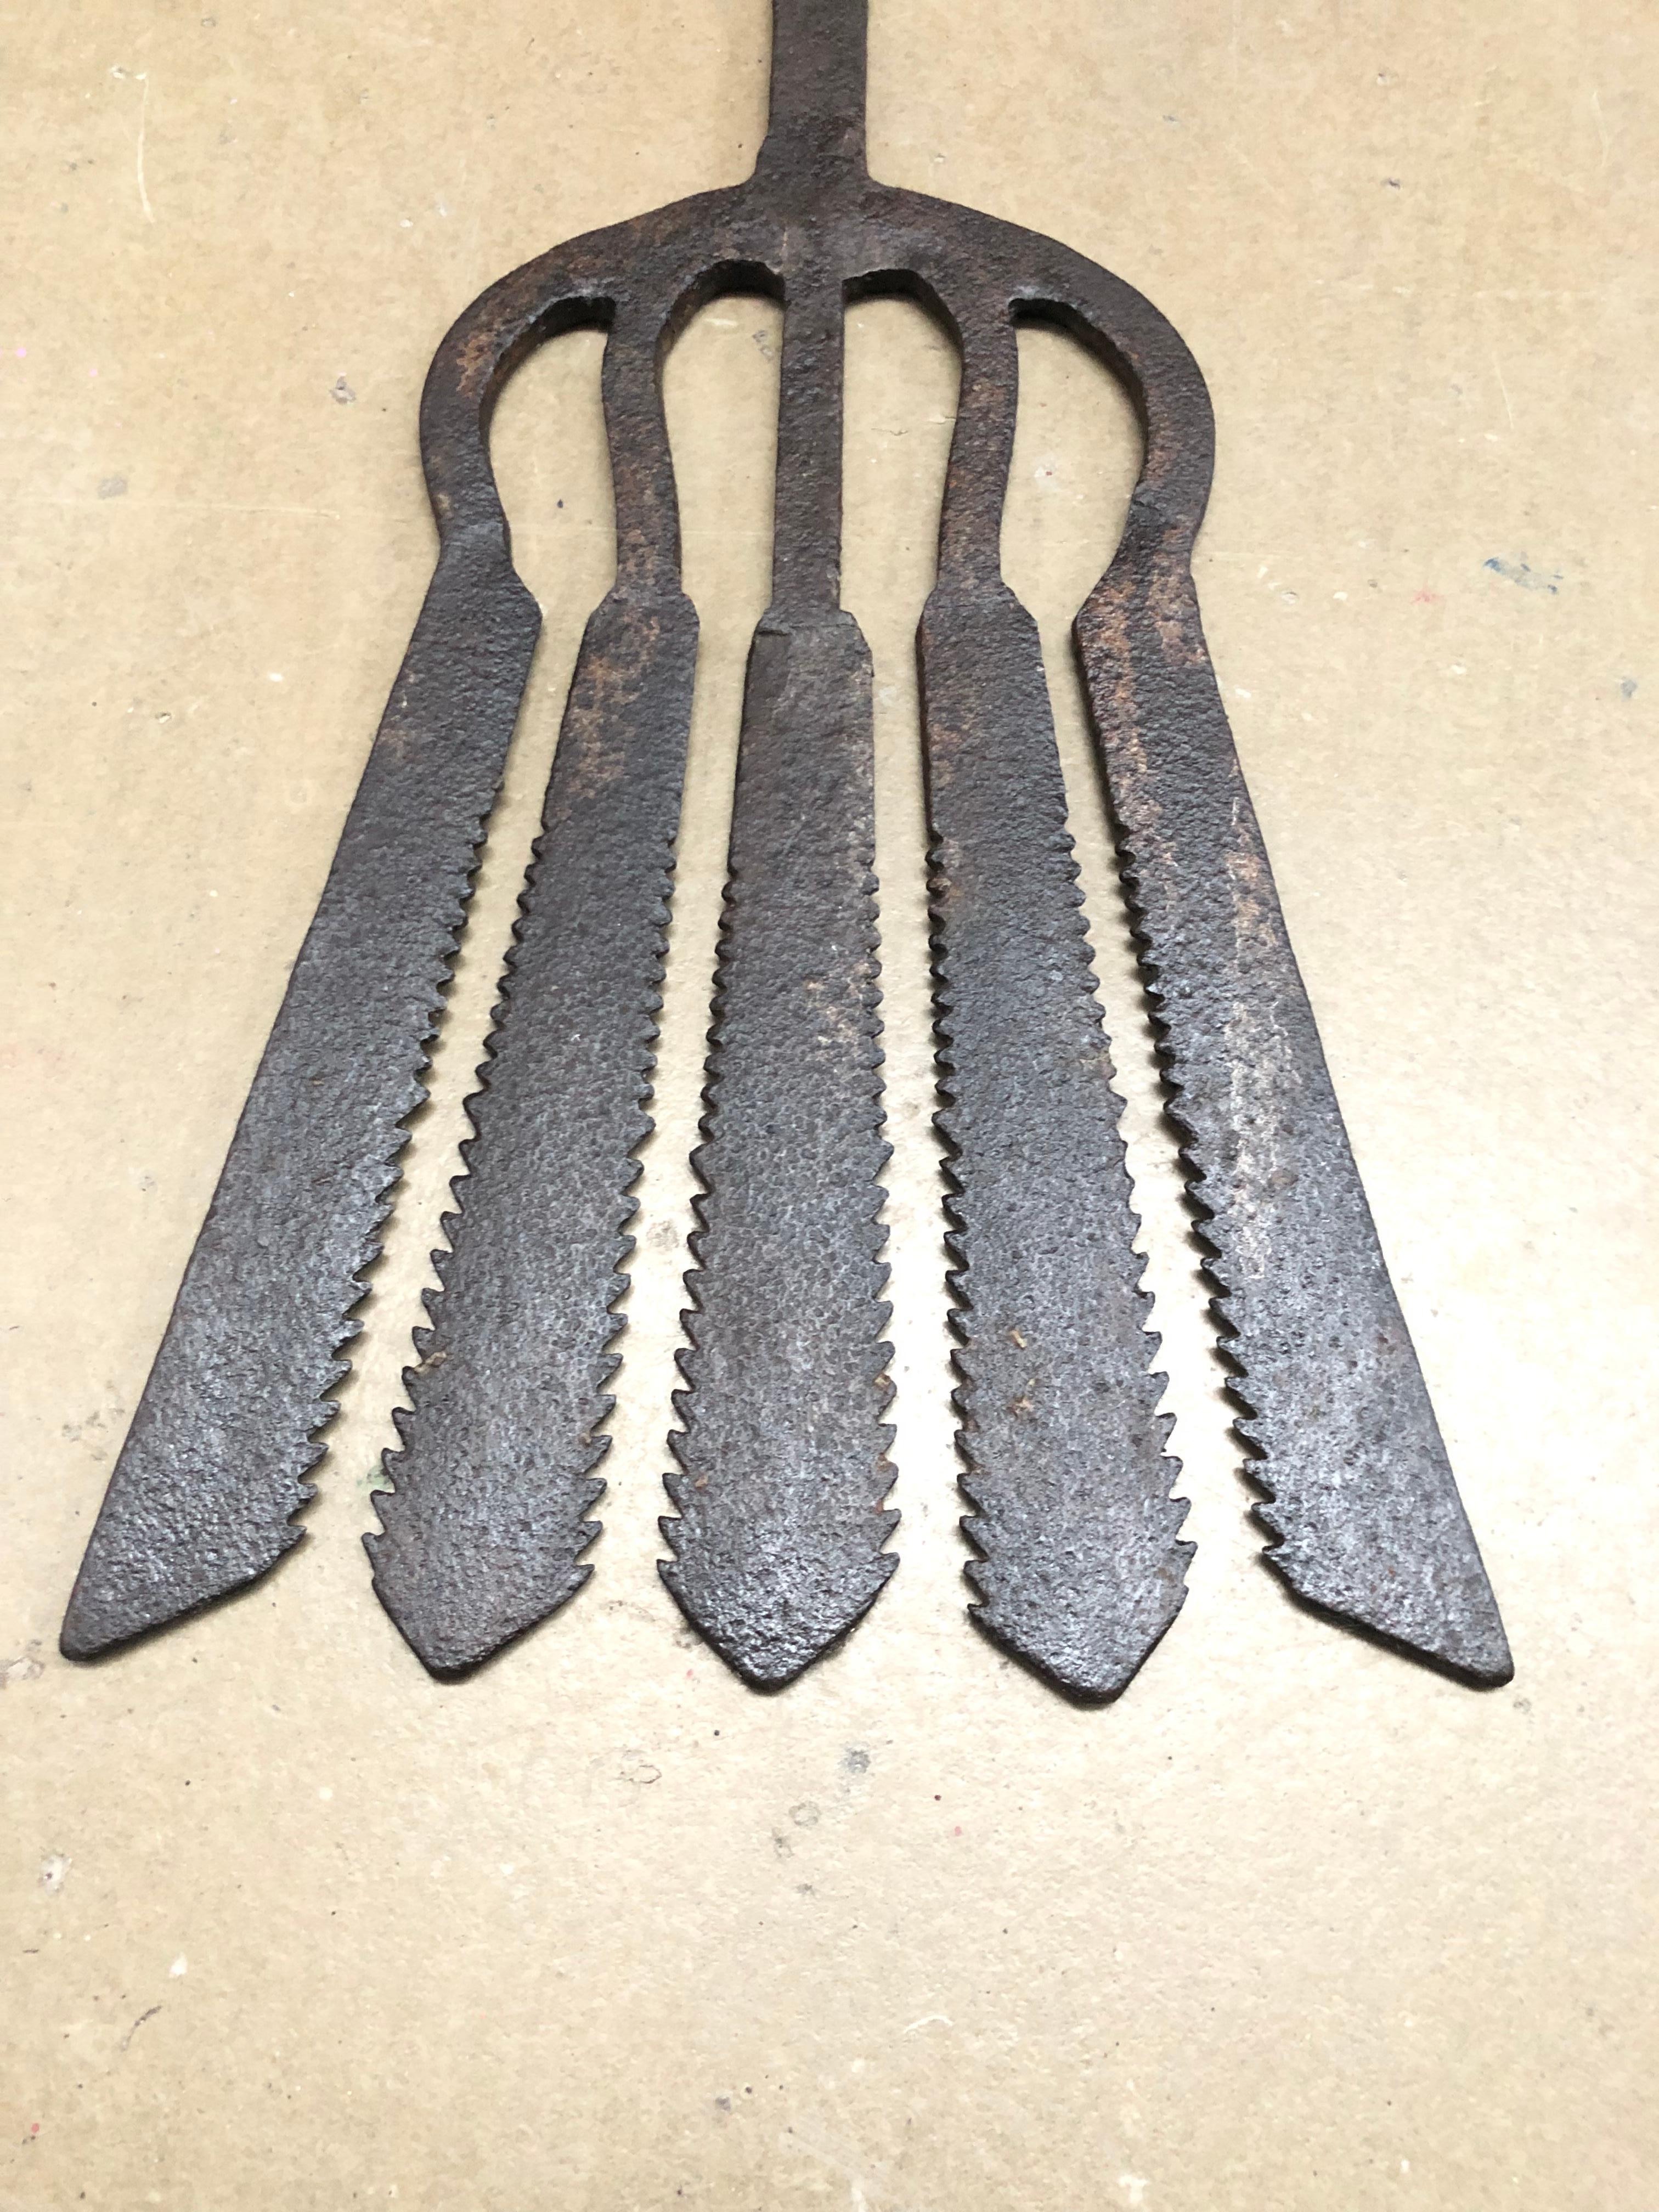 Collection of 5 Antique Wrought Iron Eel Forks 4